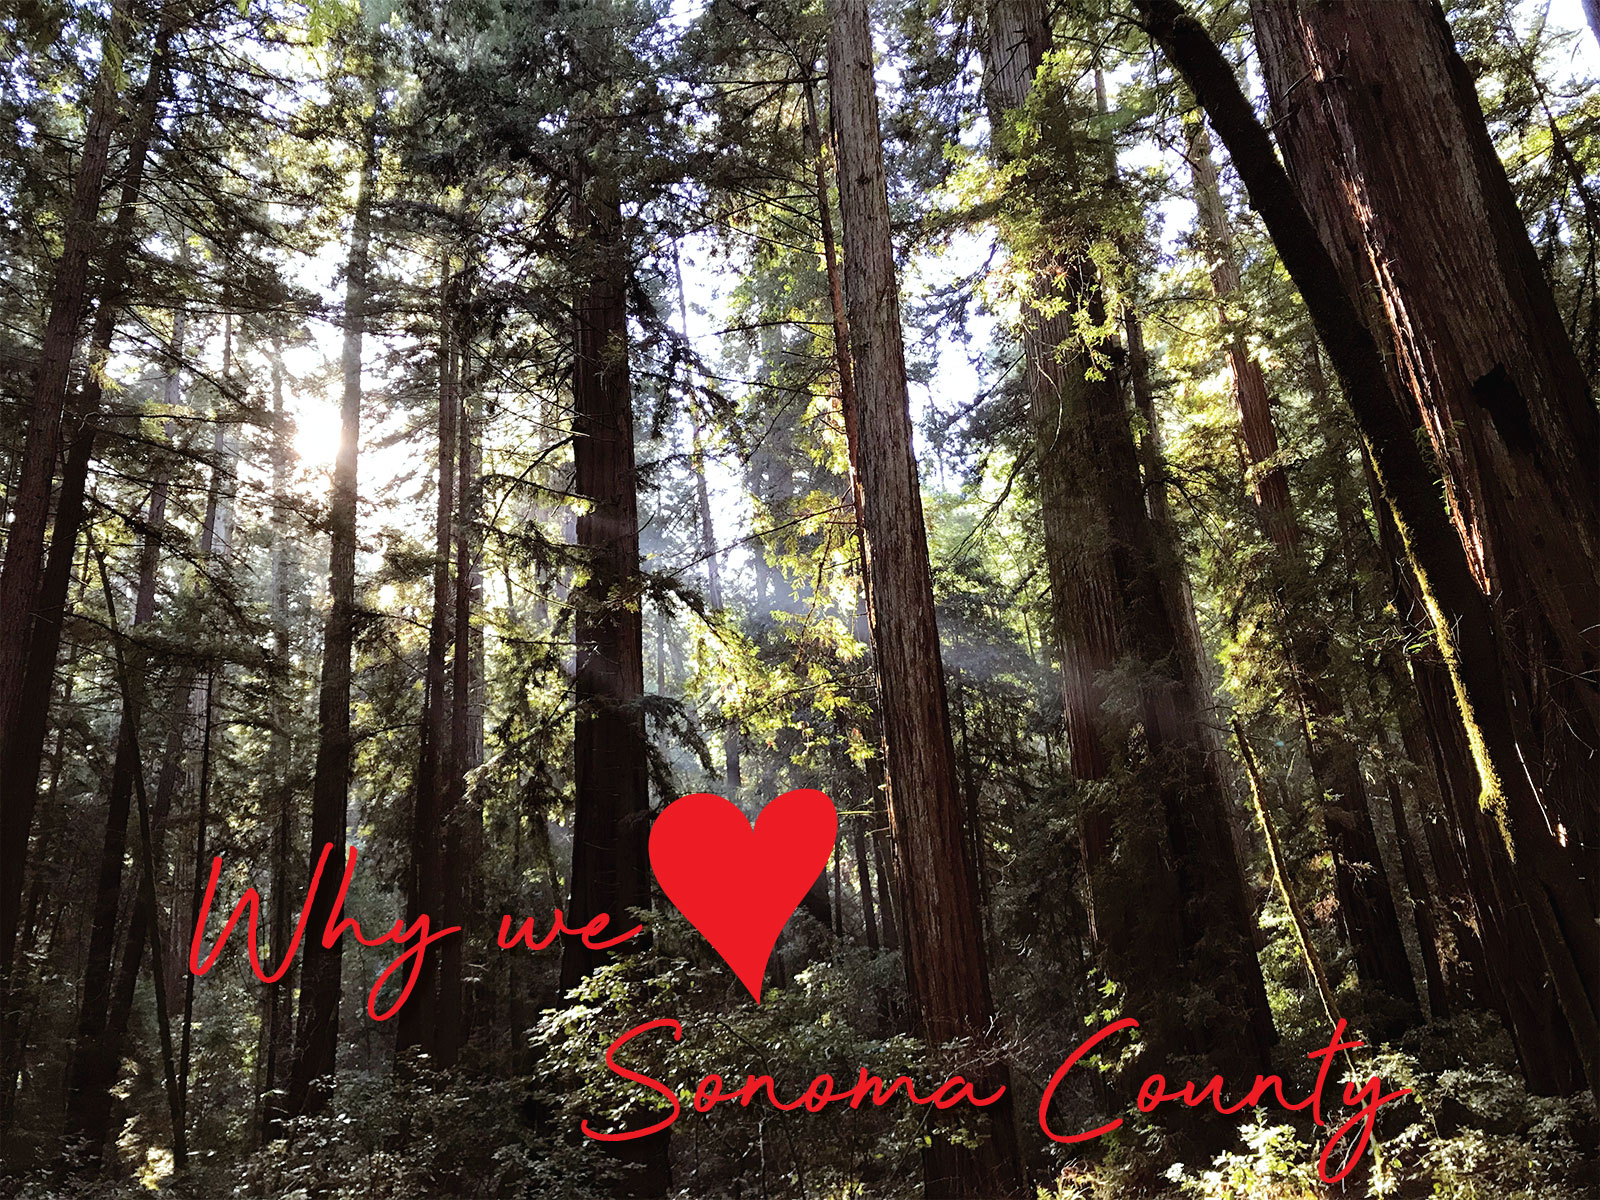 What we love about Sonoma County